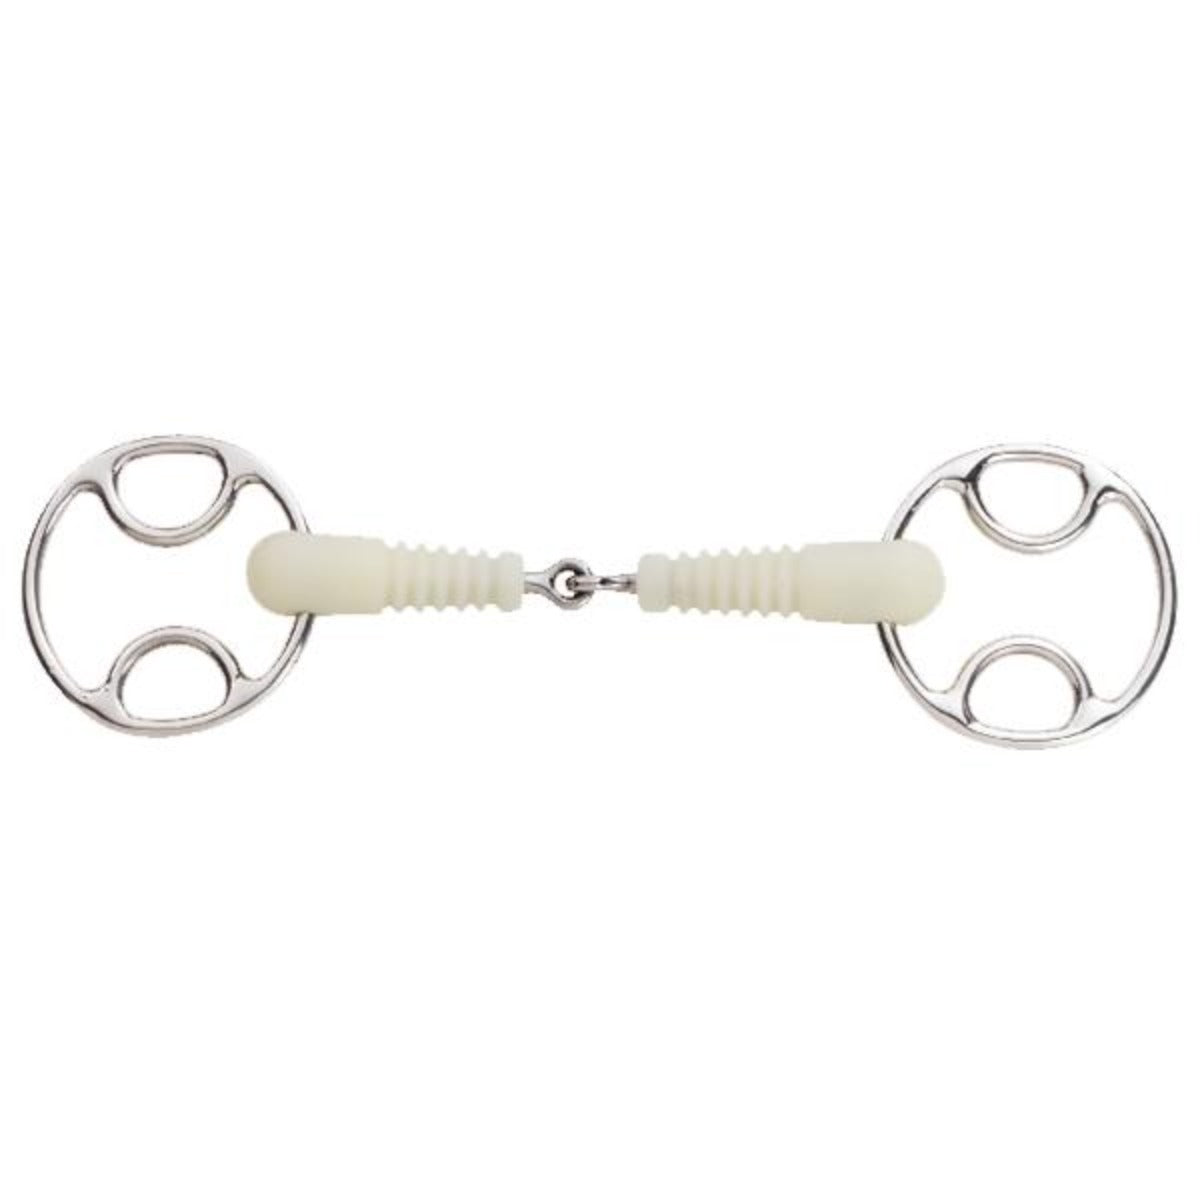 Happy Mouth Jointed Ribbed Mouth Loop Ring Gag Bit